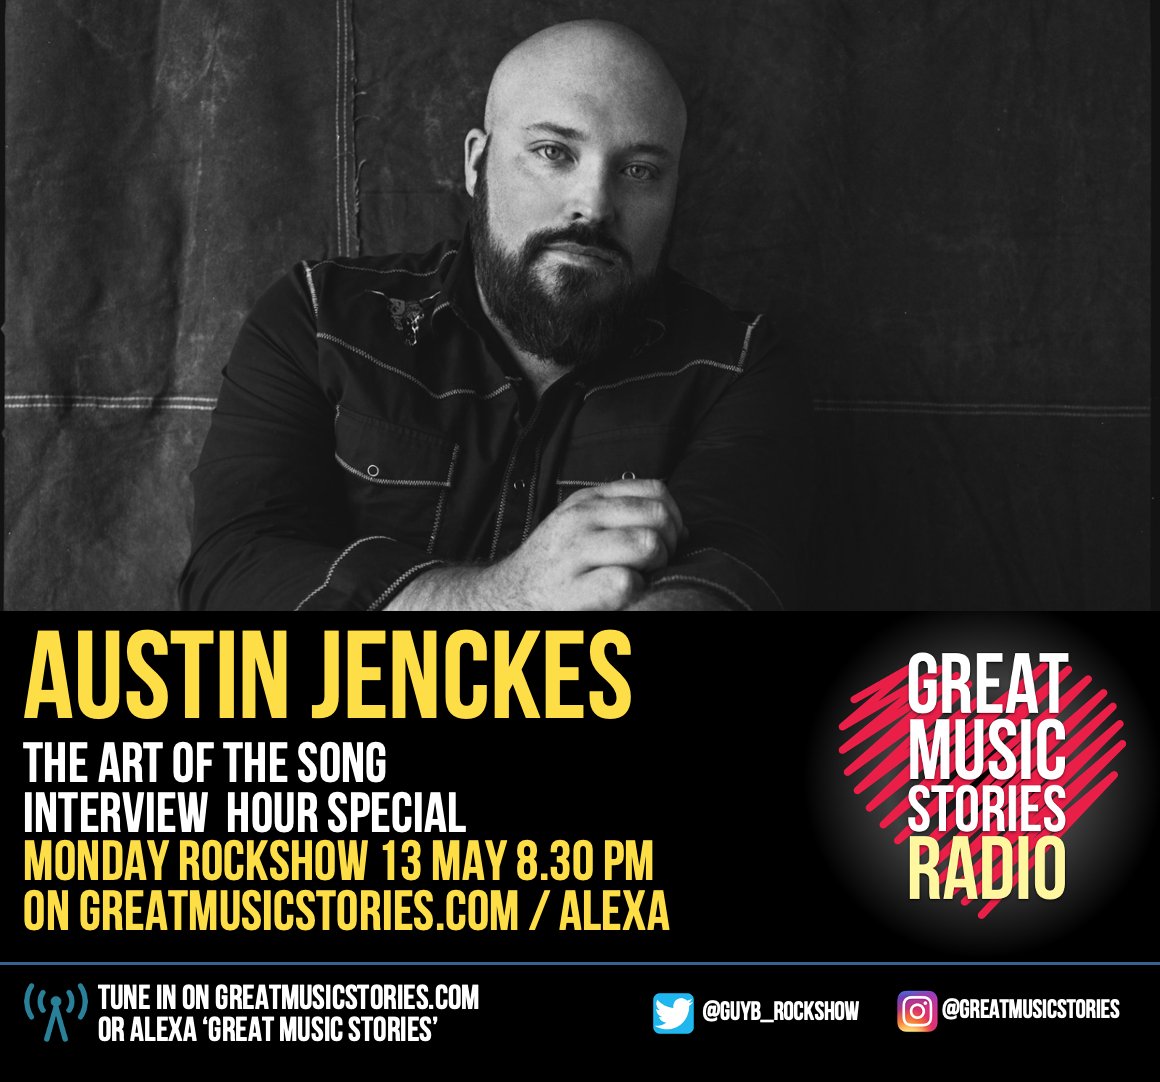 Monday Rockshow: 8.30pm Interview Hour Special with @AustinJenckes. My last in-person interview before the pandemic, a live set from Austin that helped us through lockdown - and now we focus on the road ahead and the art of great songs.